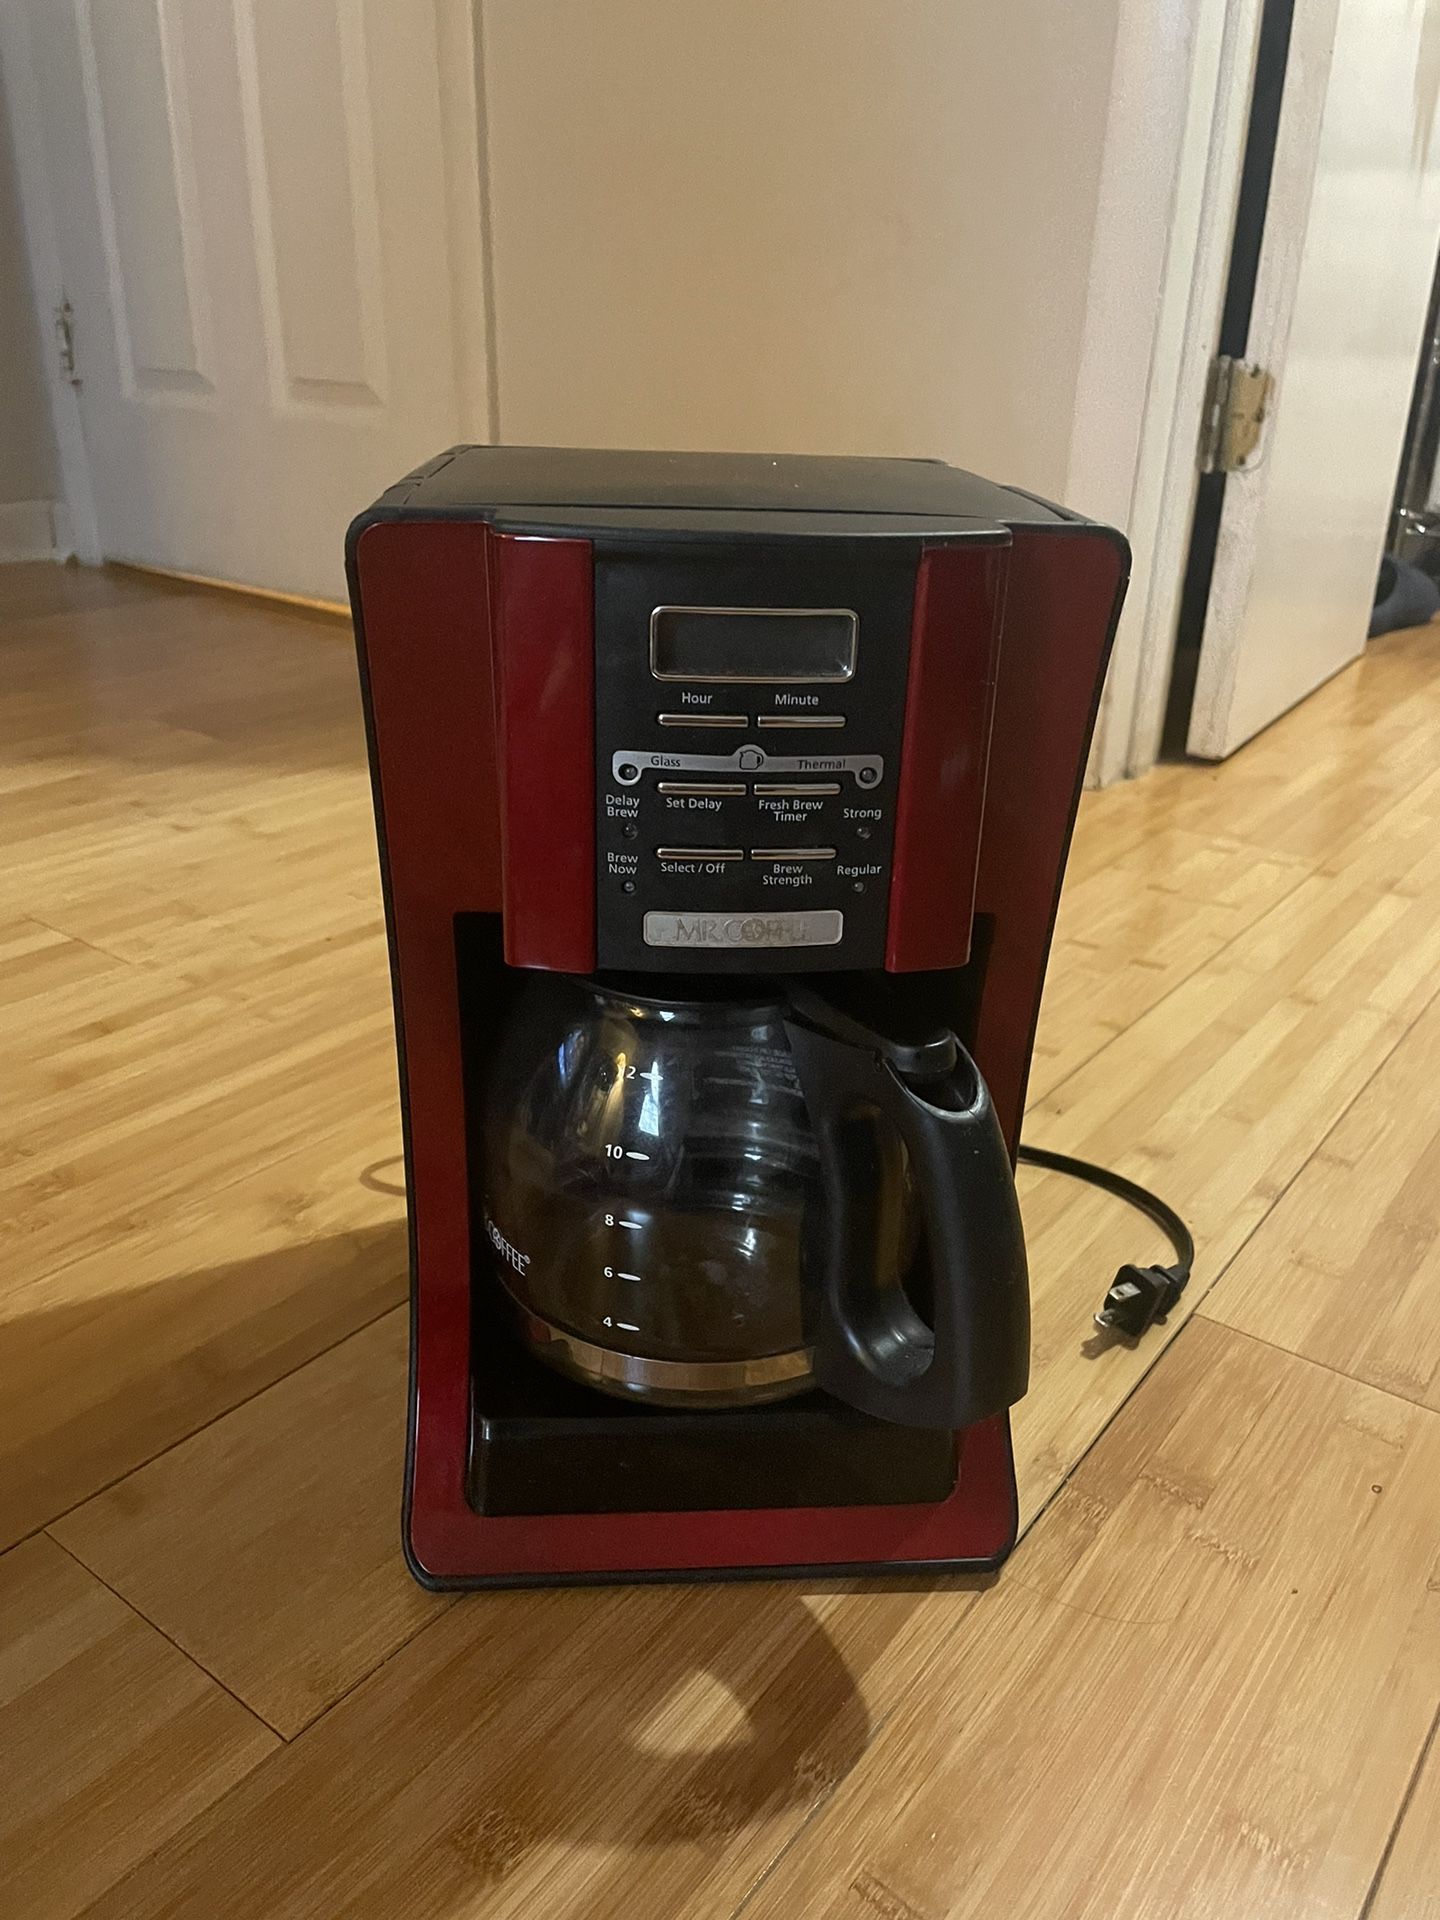 Mr. Coffee 24 Cup Commercial Coffee Maker CK240 for Sale in Renton, WA -  OfferUp